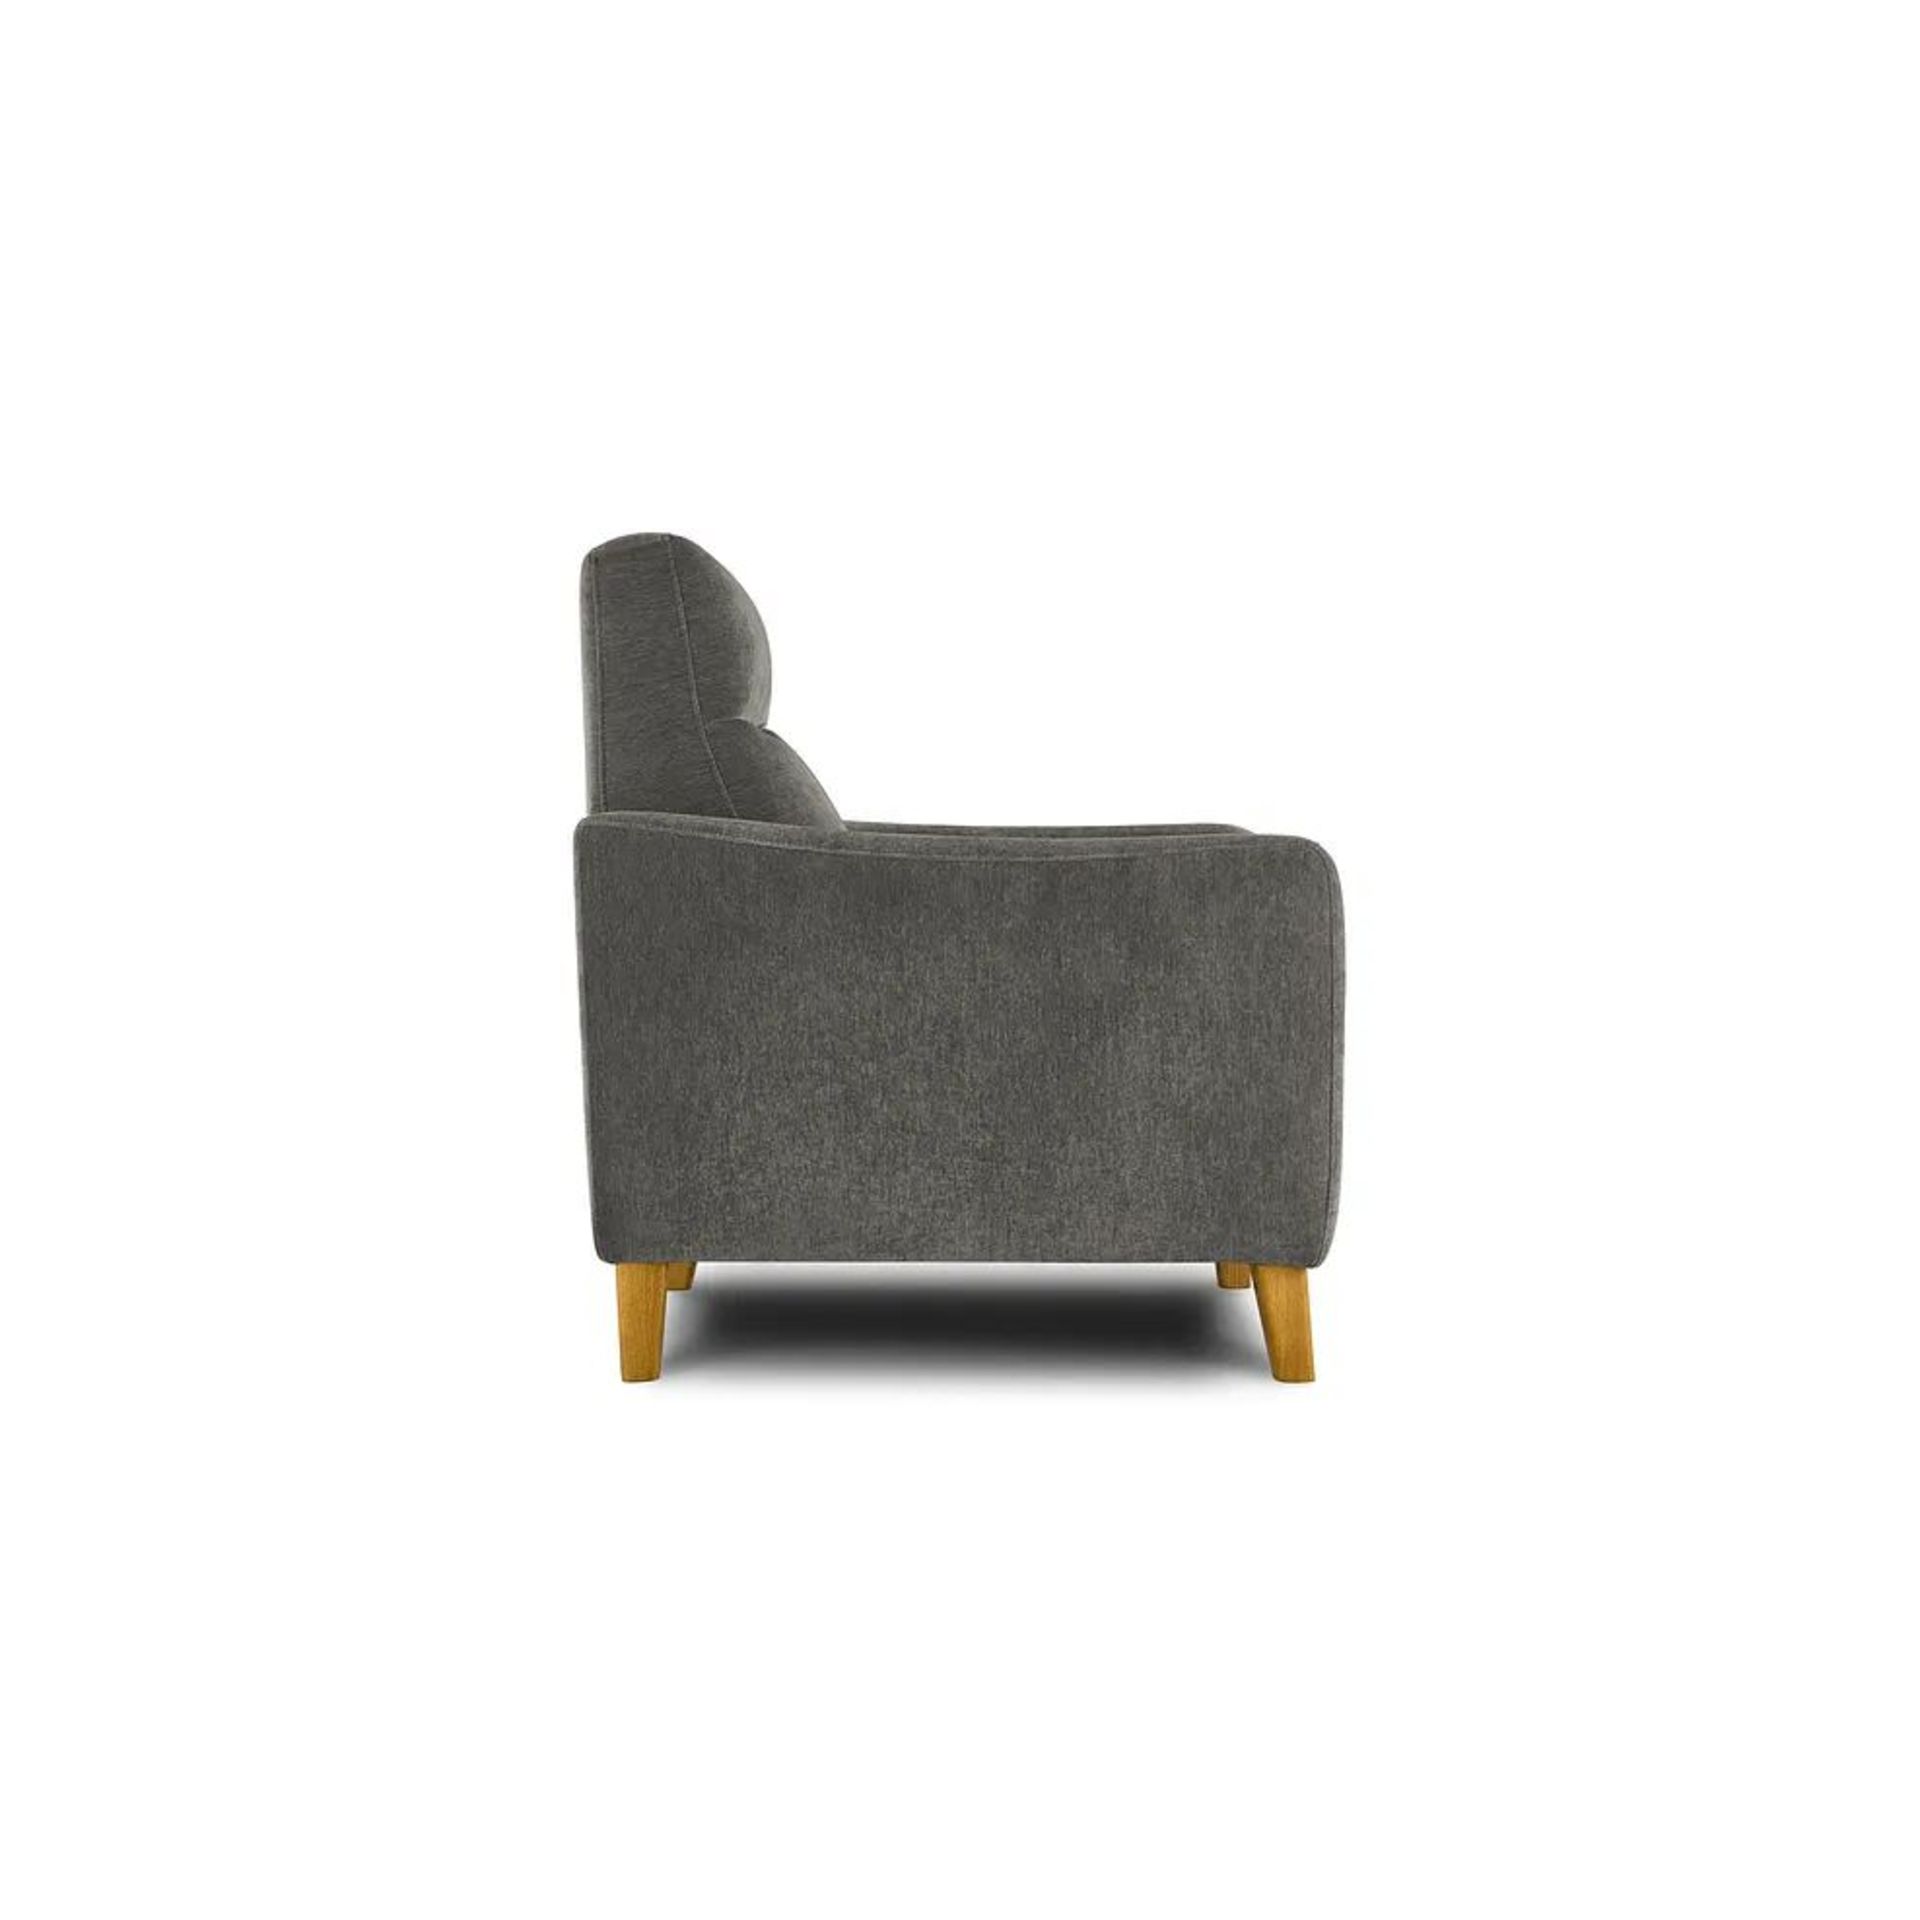 BRAND NEW DYLAN Static Armchair - DARWIN CHARCOAL FABRIC. RRP £749. Our Dylan armchair, shown here - Bild 4 aus 7